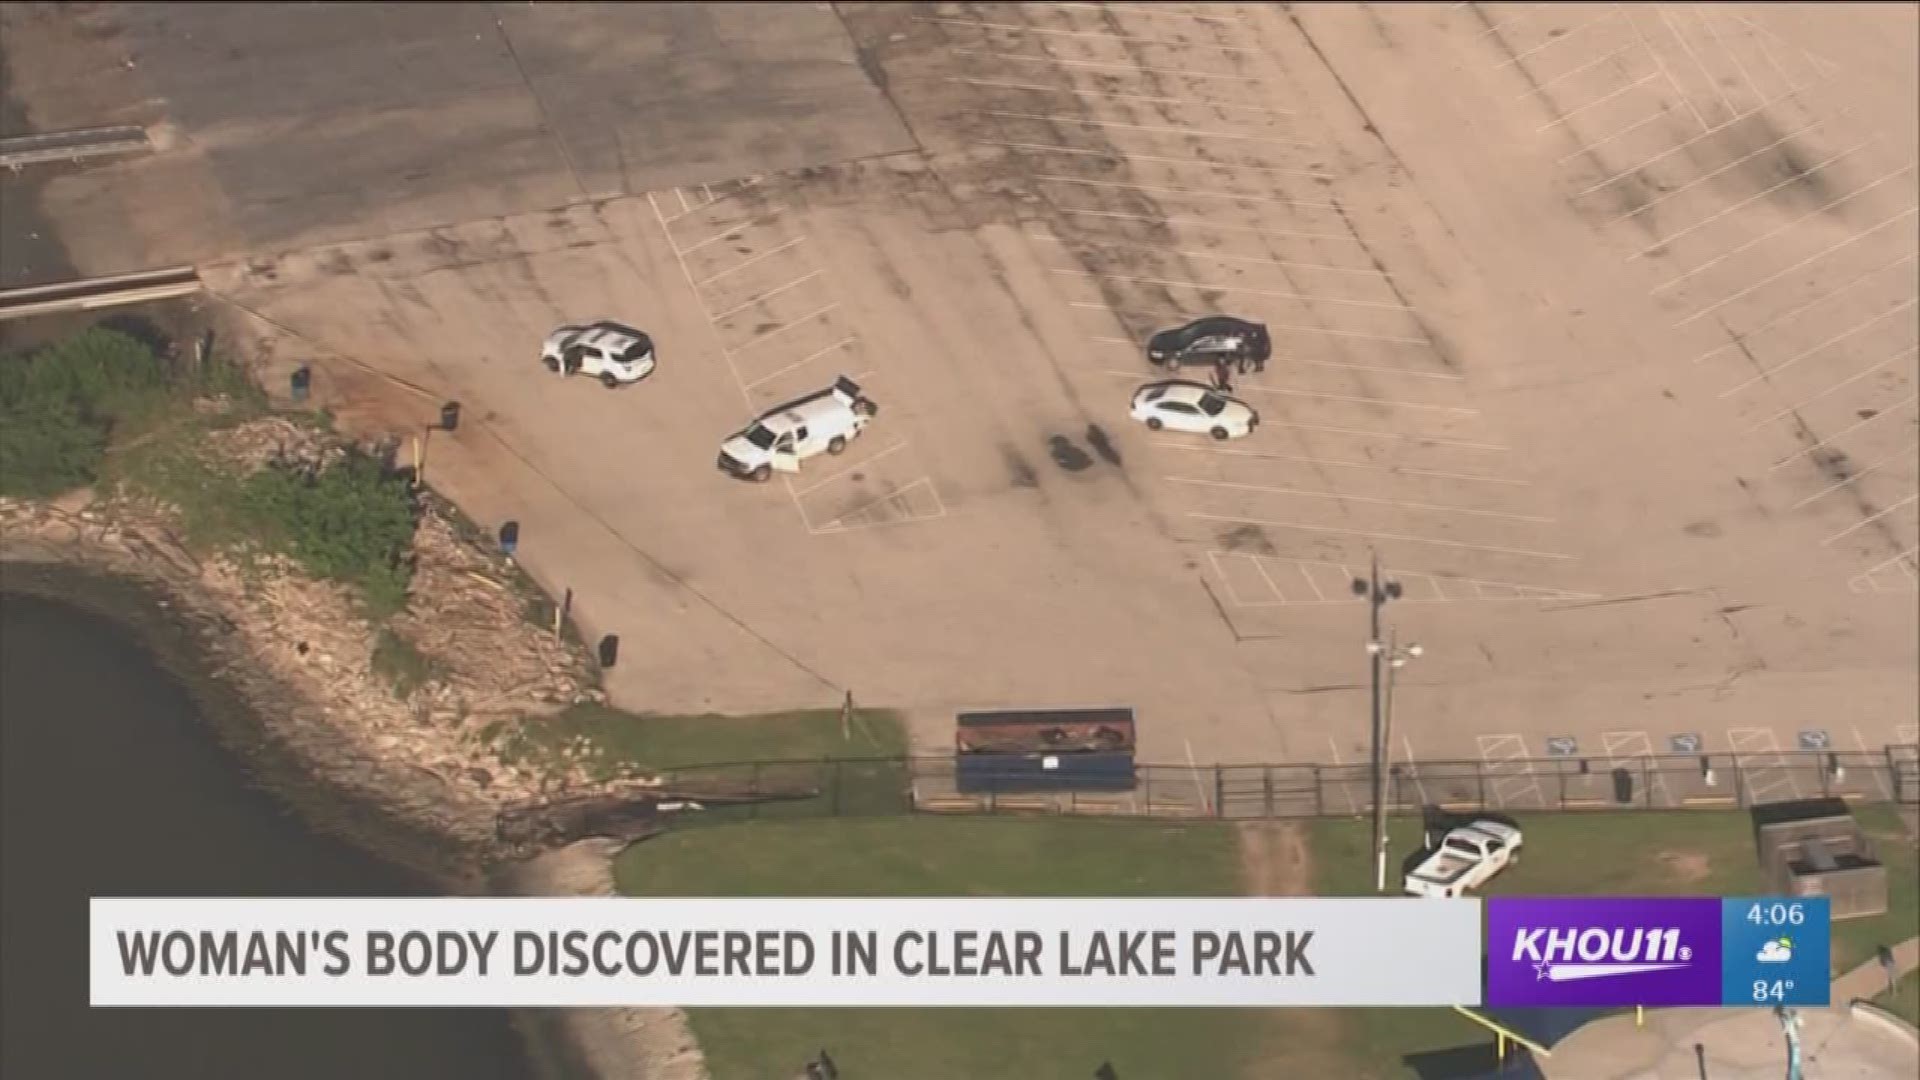 The body of a 25 year old woman was found in Clear Lake Park on Tuesday. It's unclear how she died. 